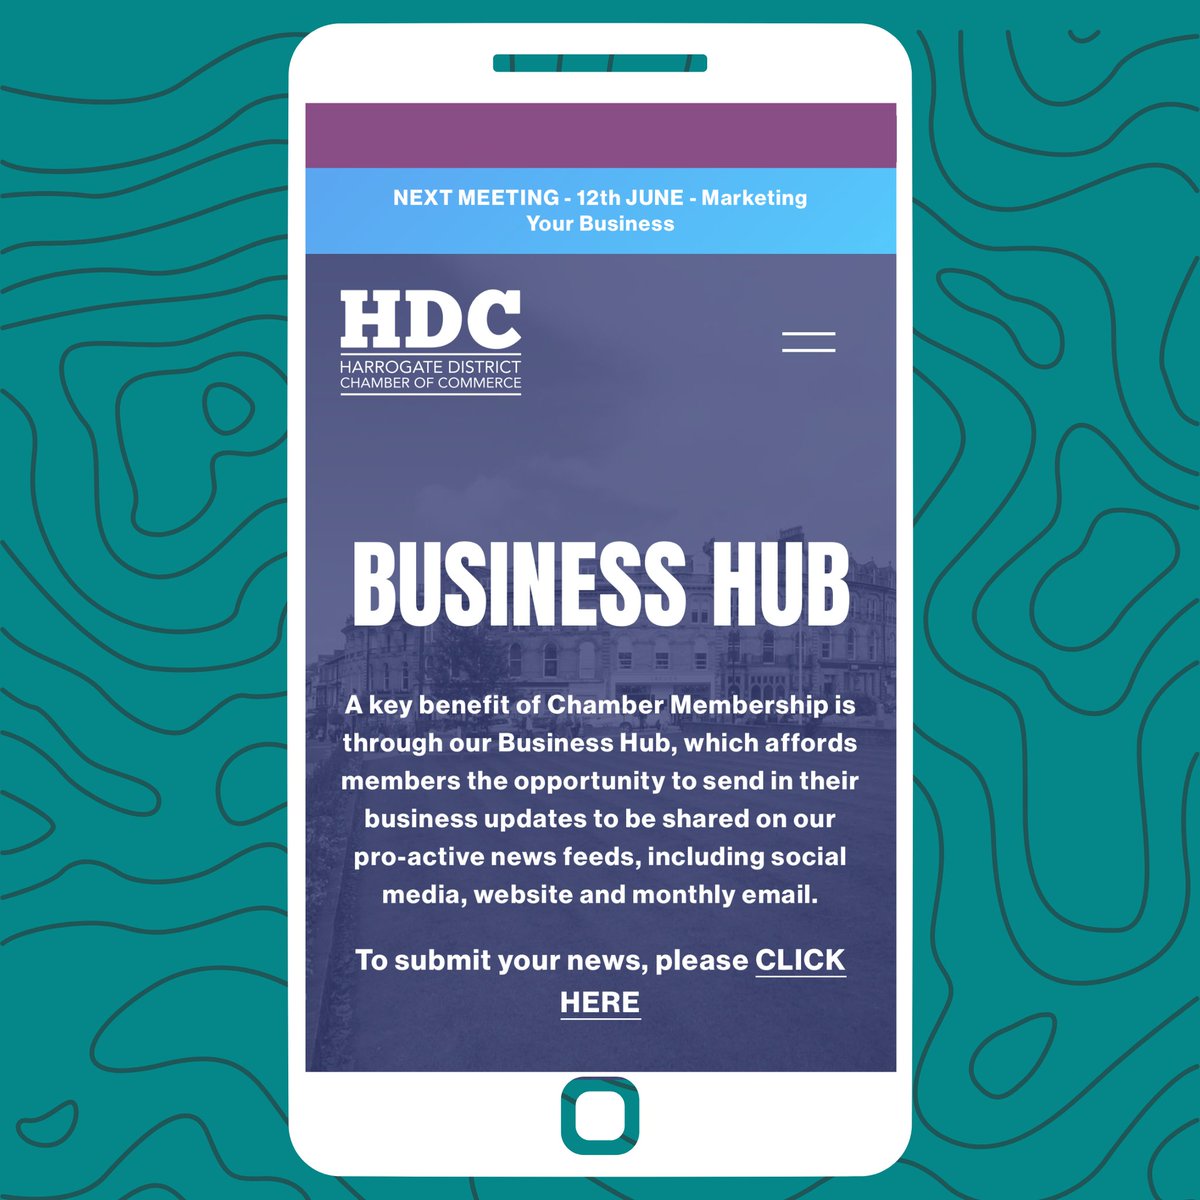 Make sure you’re not missing out on our Business Hub!

It’s the perfect place to keep up to date with all the latest news and events from the Chamber.

To discover more about the Chamber, visit: 
harrogatechamber.co.uk/business-hub 

#HarrogateChamber #HDCC #BusinessHub #News #MemberBenefit